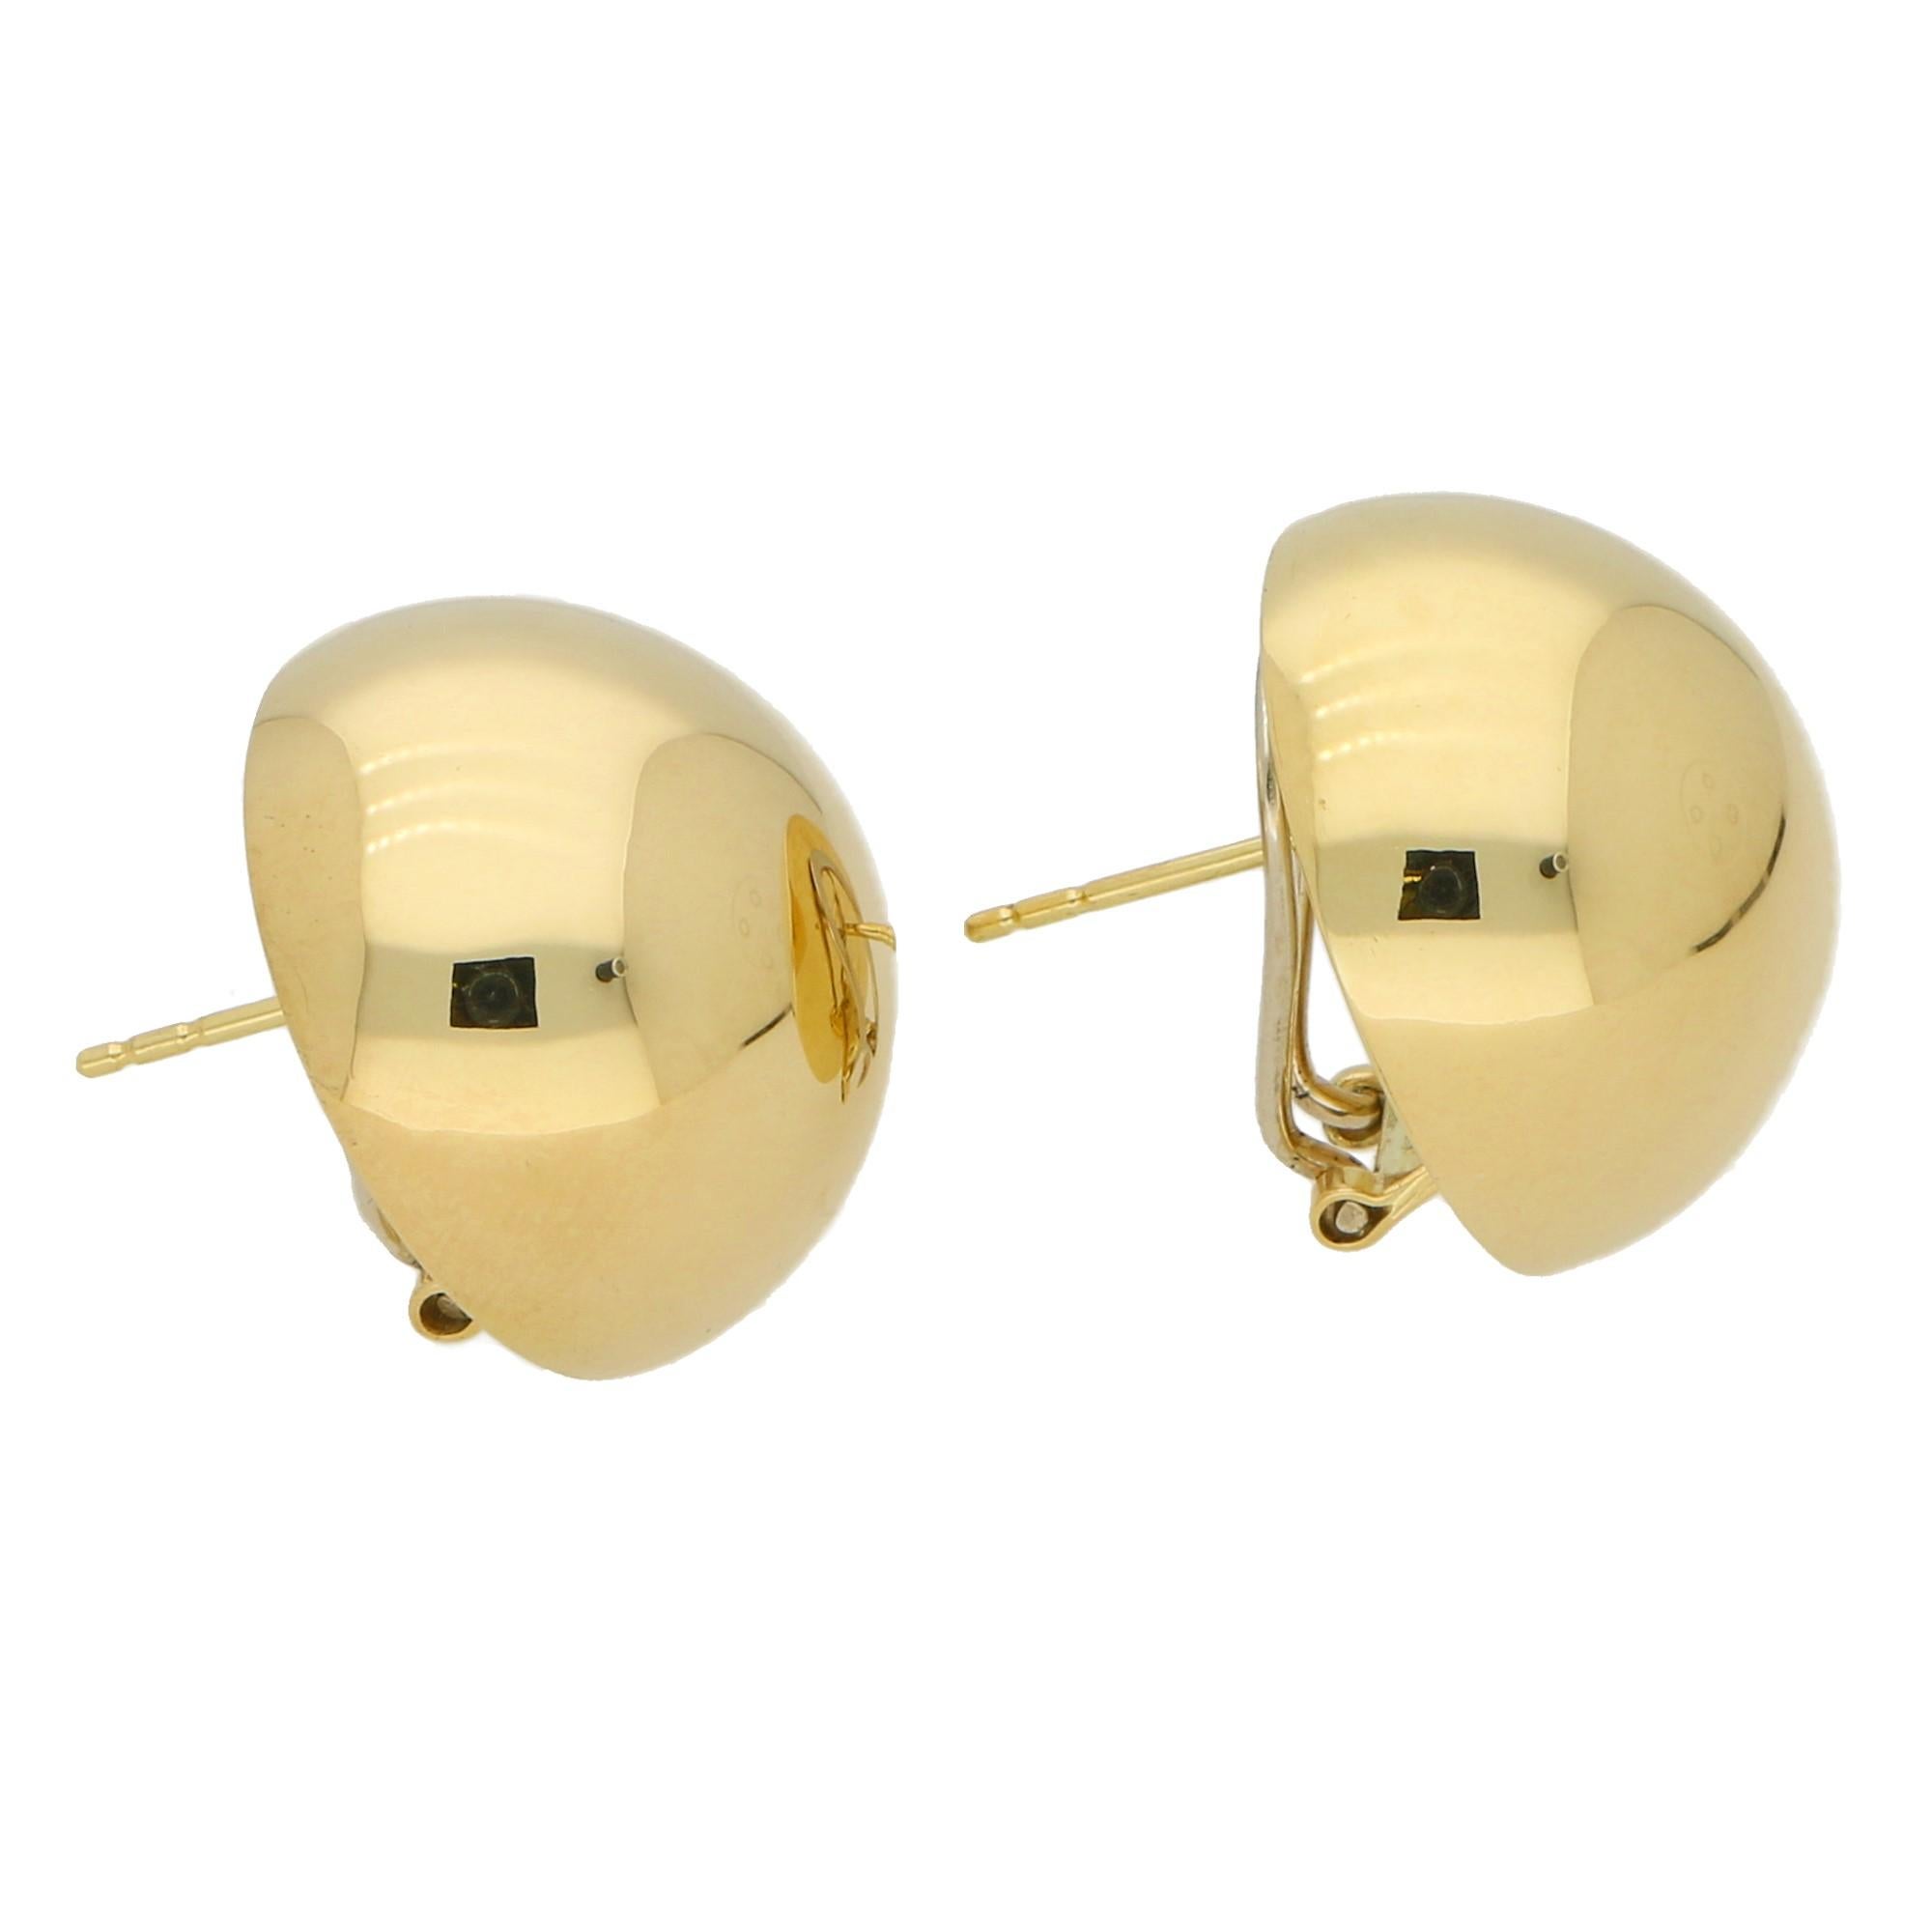  A lovely pair of large domed circular earrings made of 14k yellow and white gold.

The beauty of these earrings lies in the design! Even though the earrings are a larger pair they are in fact wonderfully light and therefore you can comfortably wear